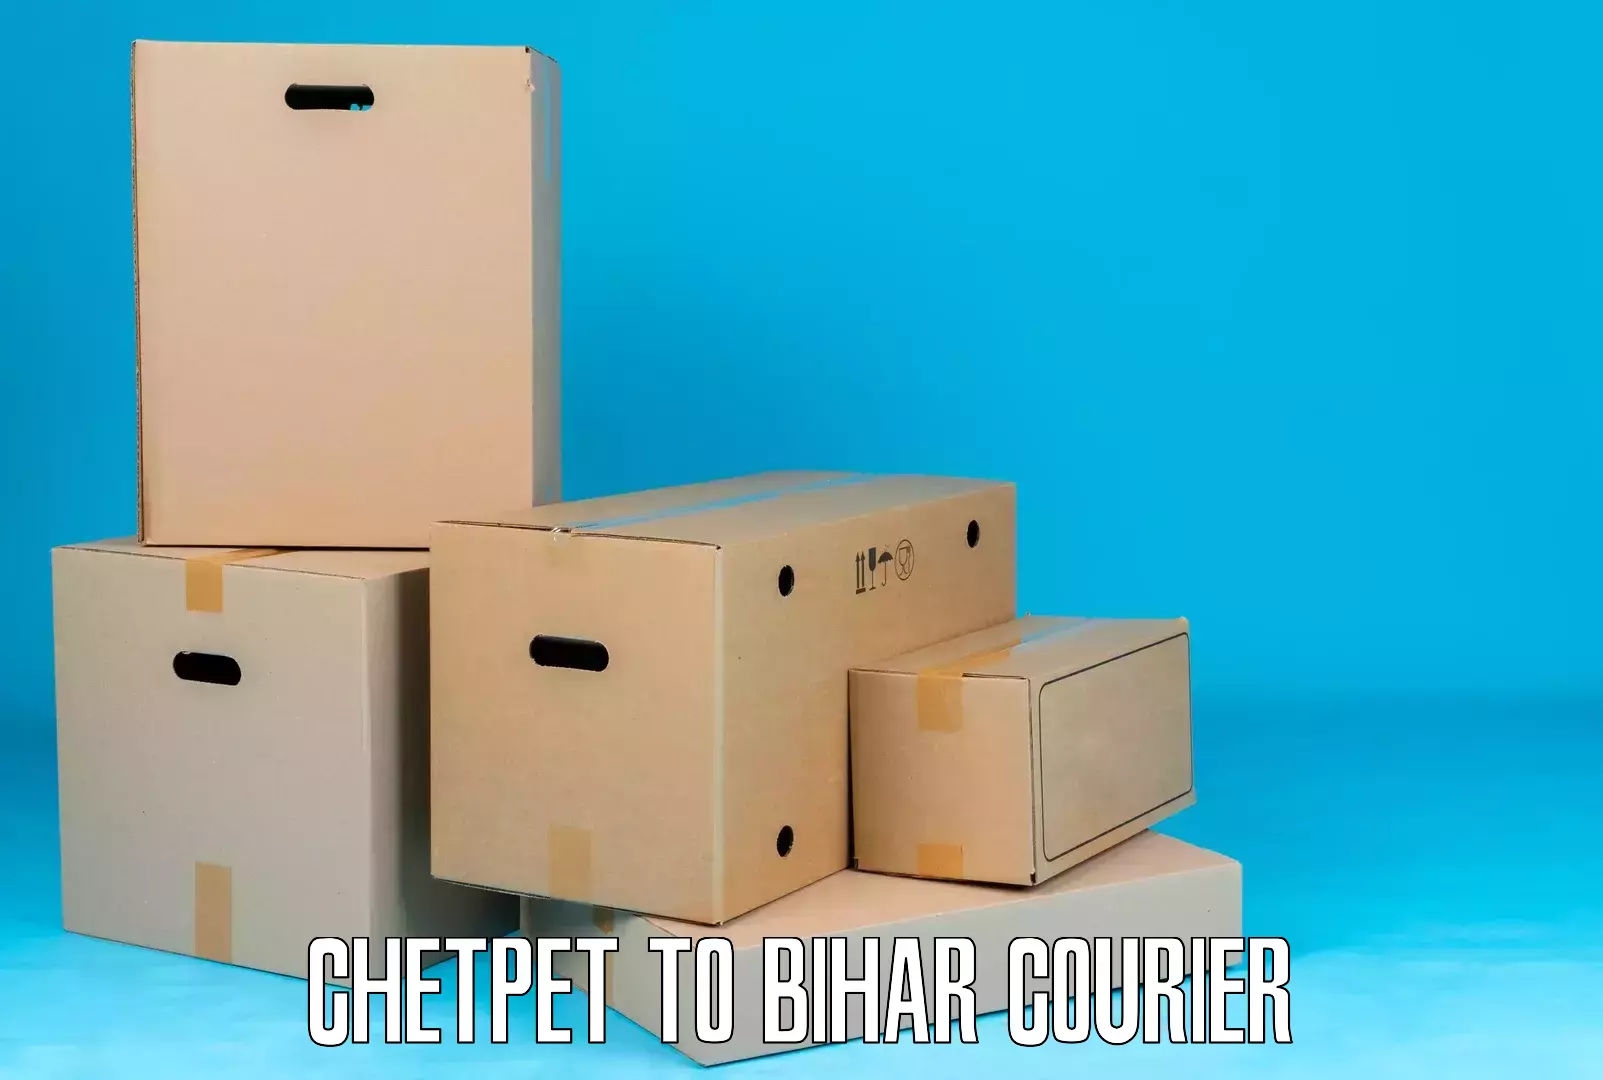 Courier rate comparison Chetpet to Barauni